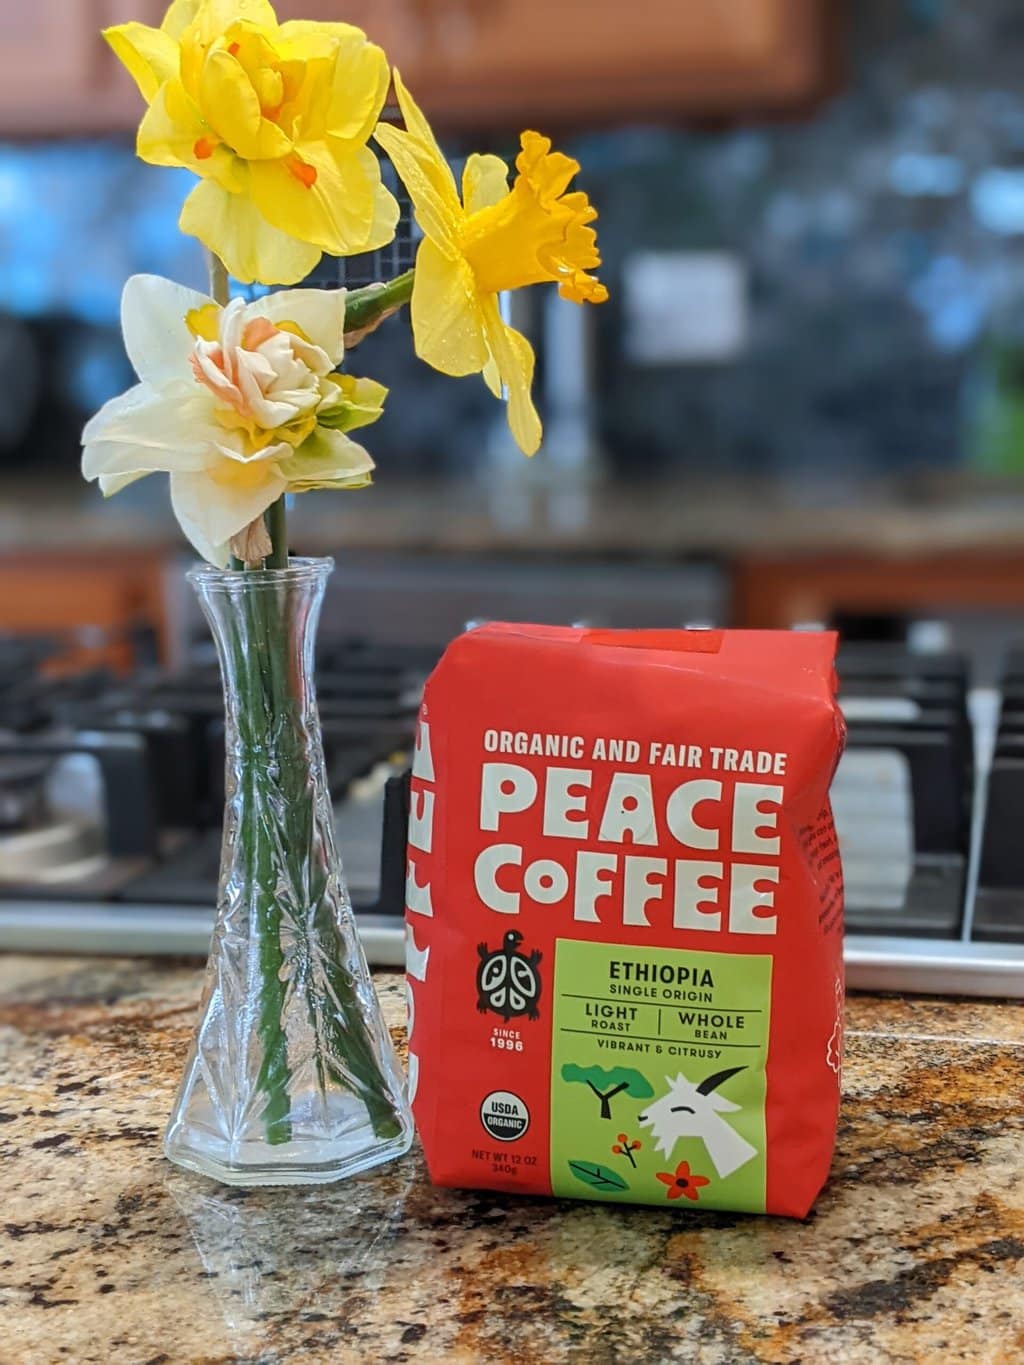 There is a package of Peace Coffee Ethiopia Single Origin Light Roast on the kitchen table, next to a vase with daffodils flowers